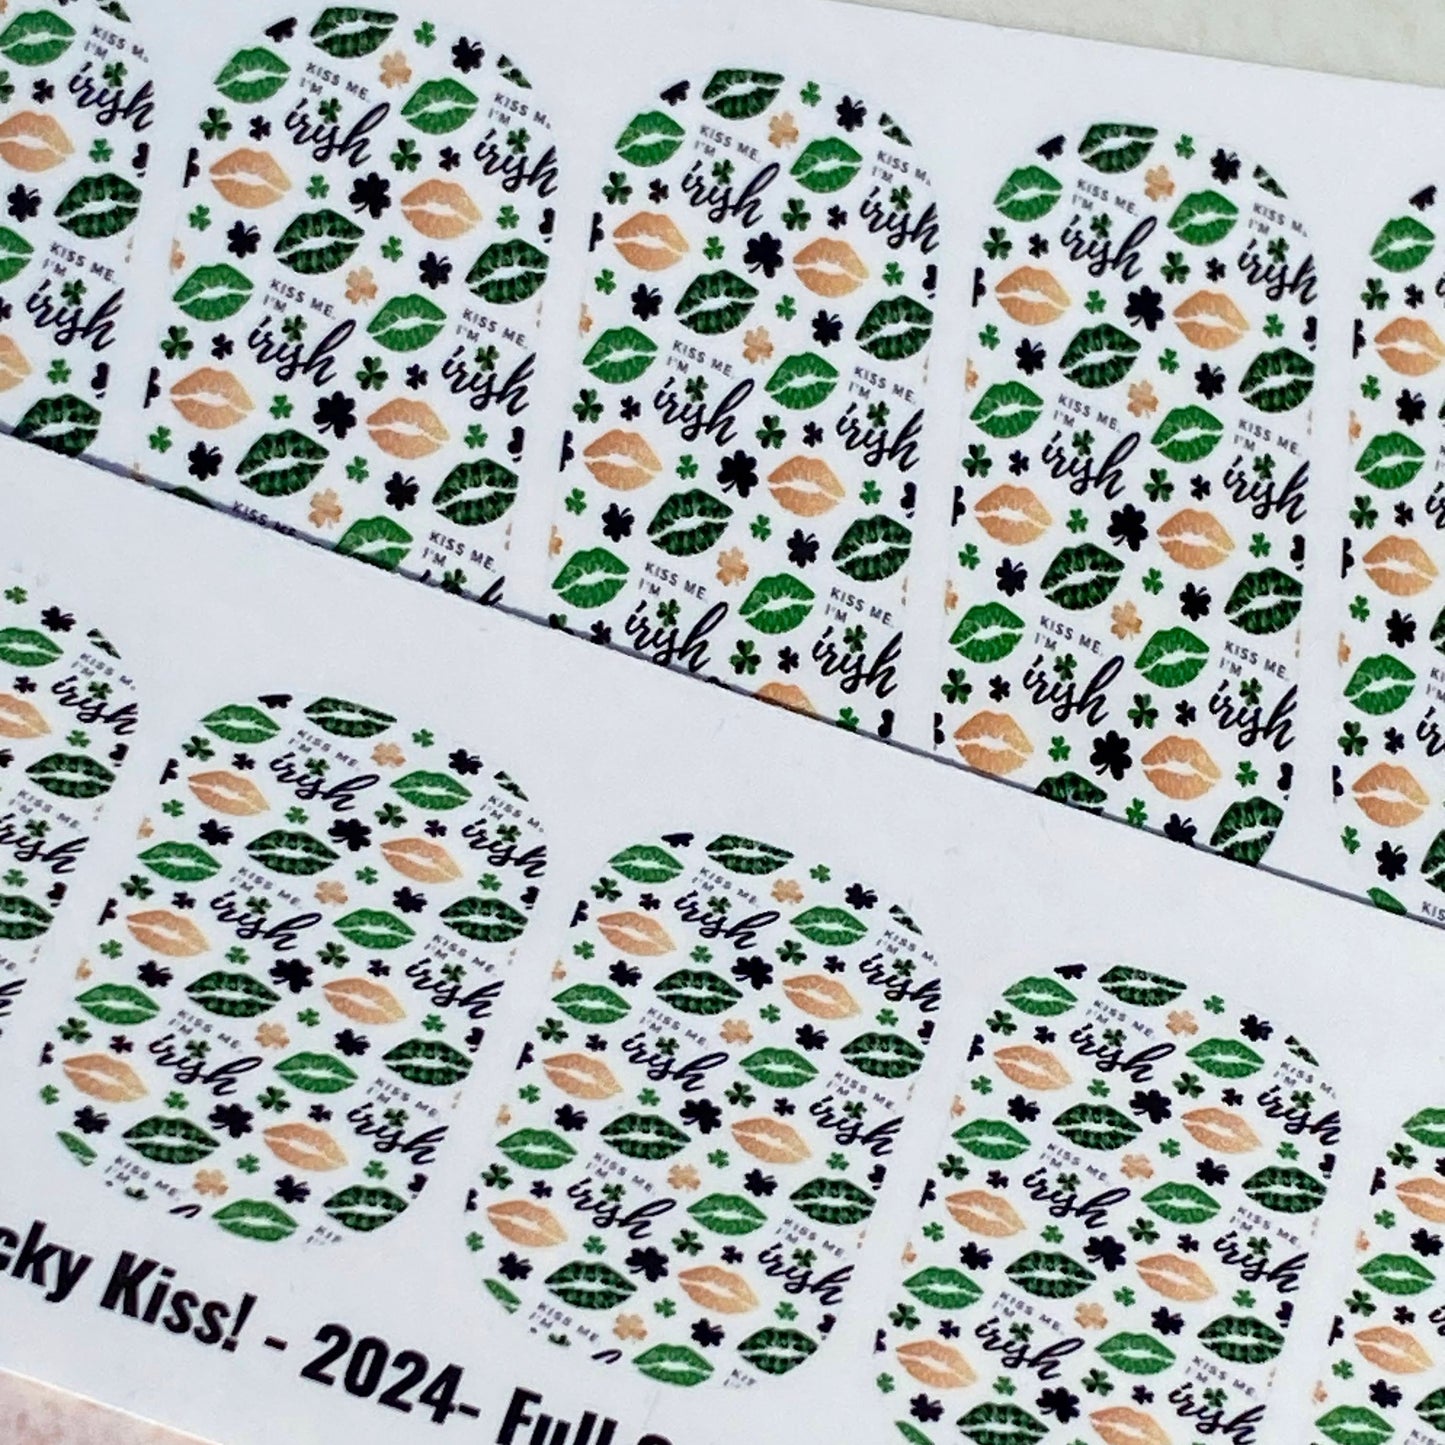 St. Patrick's Day Nail Wrap Decals- Lucky Kiss